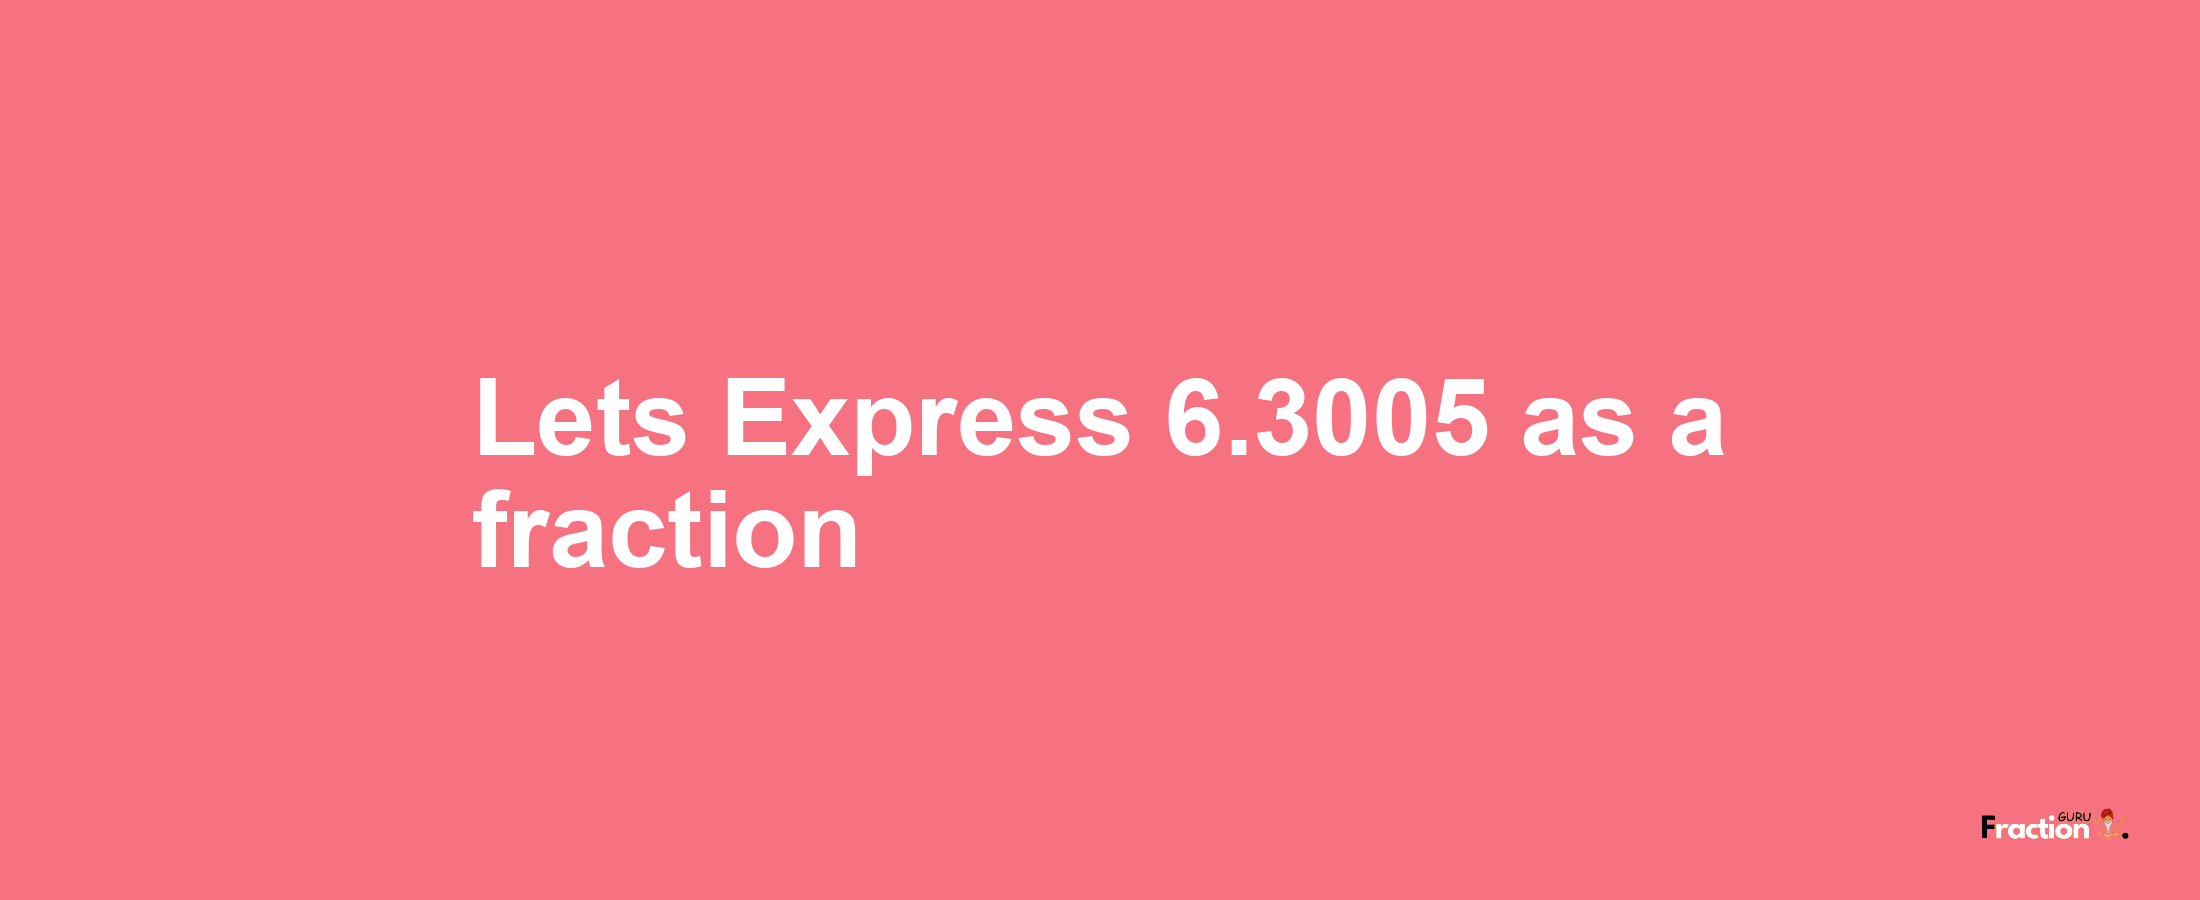 Lets Express 6.3005 as afraction